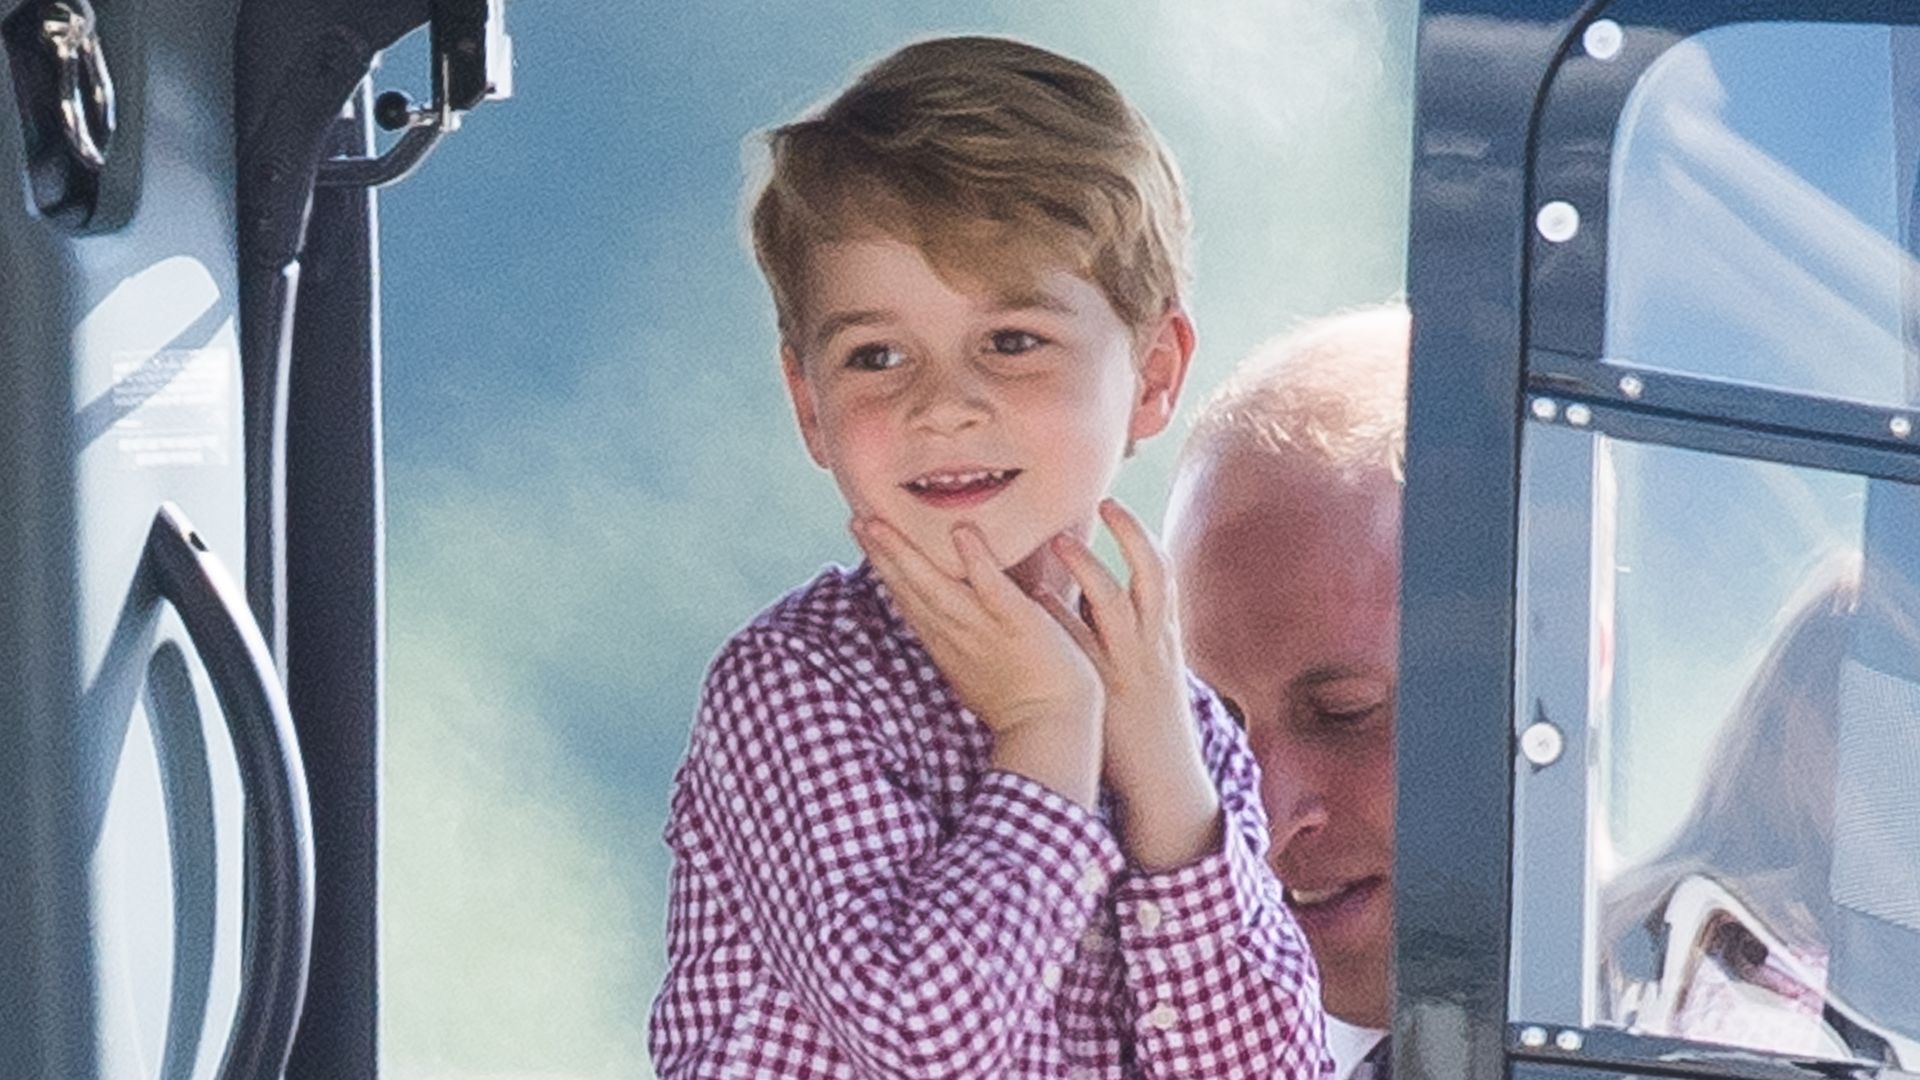 Prince George looking gleeful in a check shirt